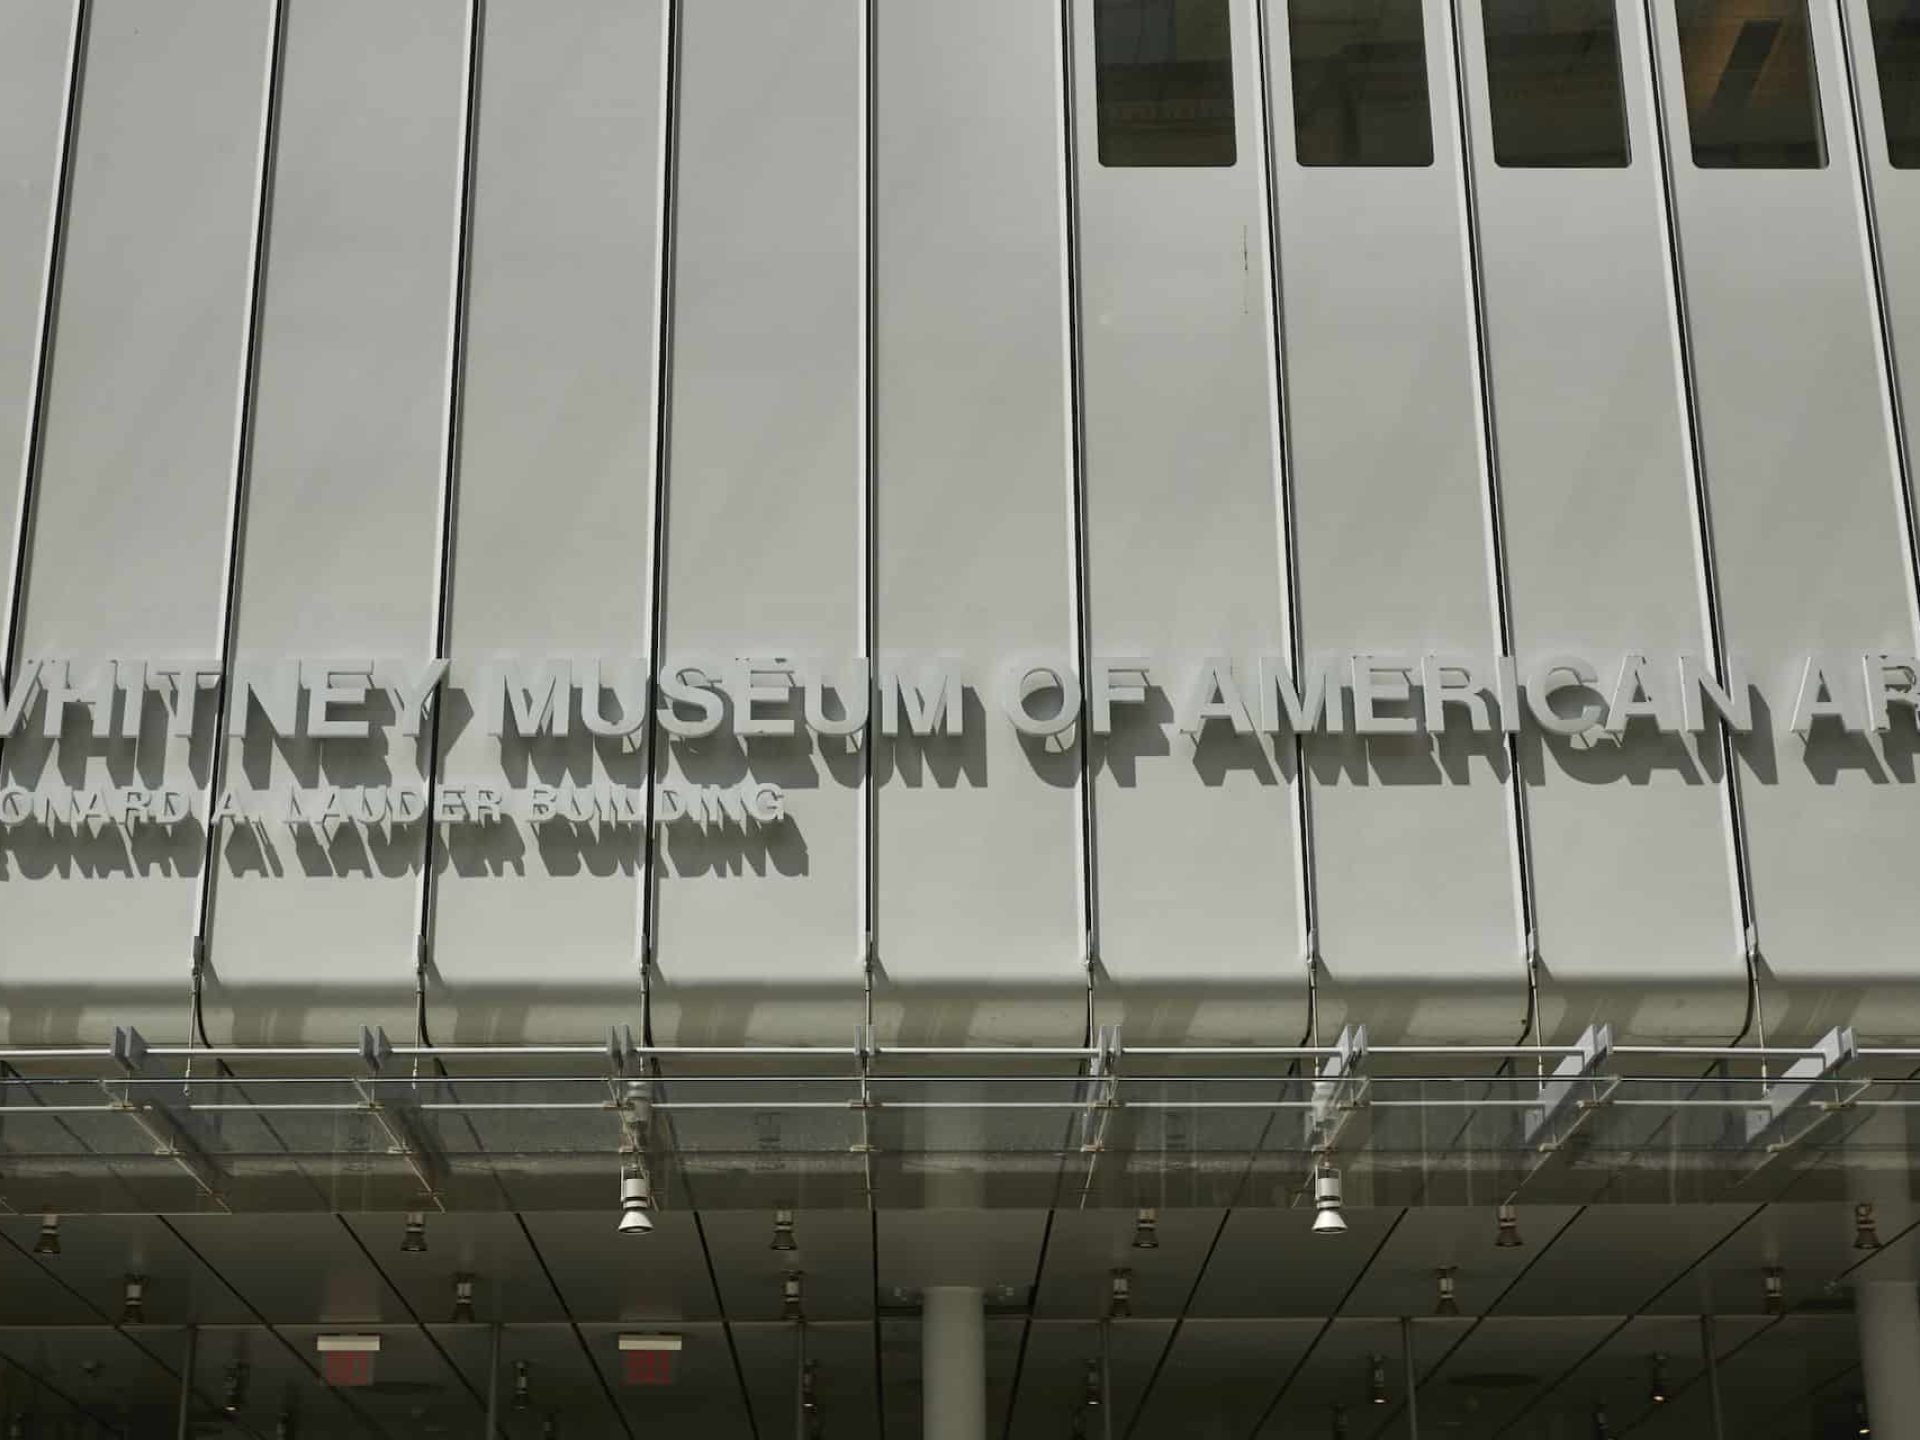 Close up of the Whitney Museum of American Art in New York. Building overhang above the entrance with tall windows.